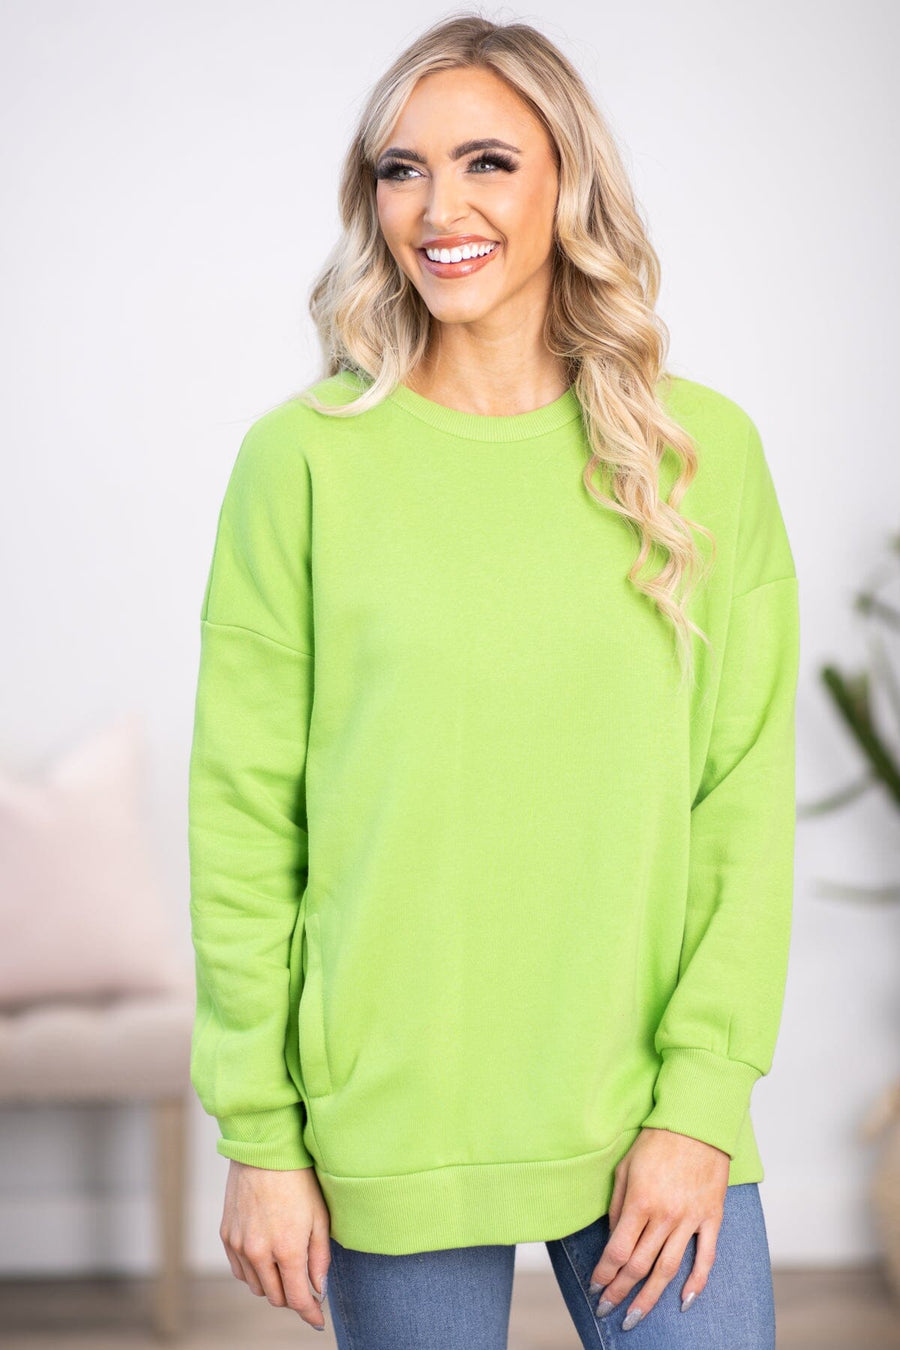 Kelly Green Crew Neck Sweatshirt With Pockets - Filly Flair